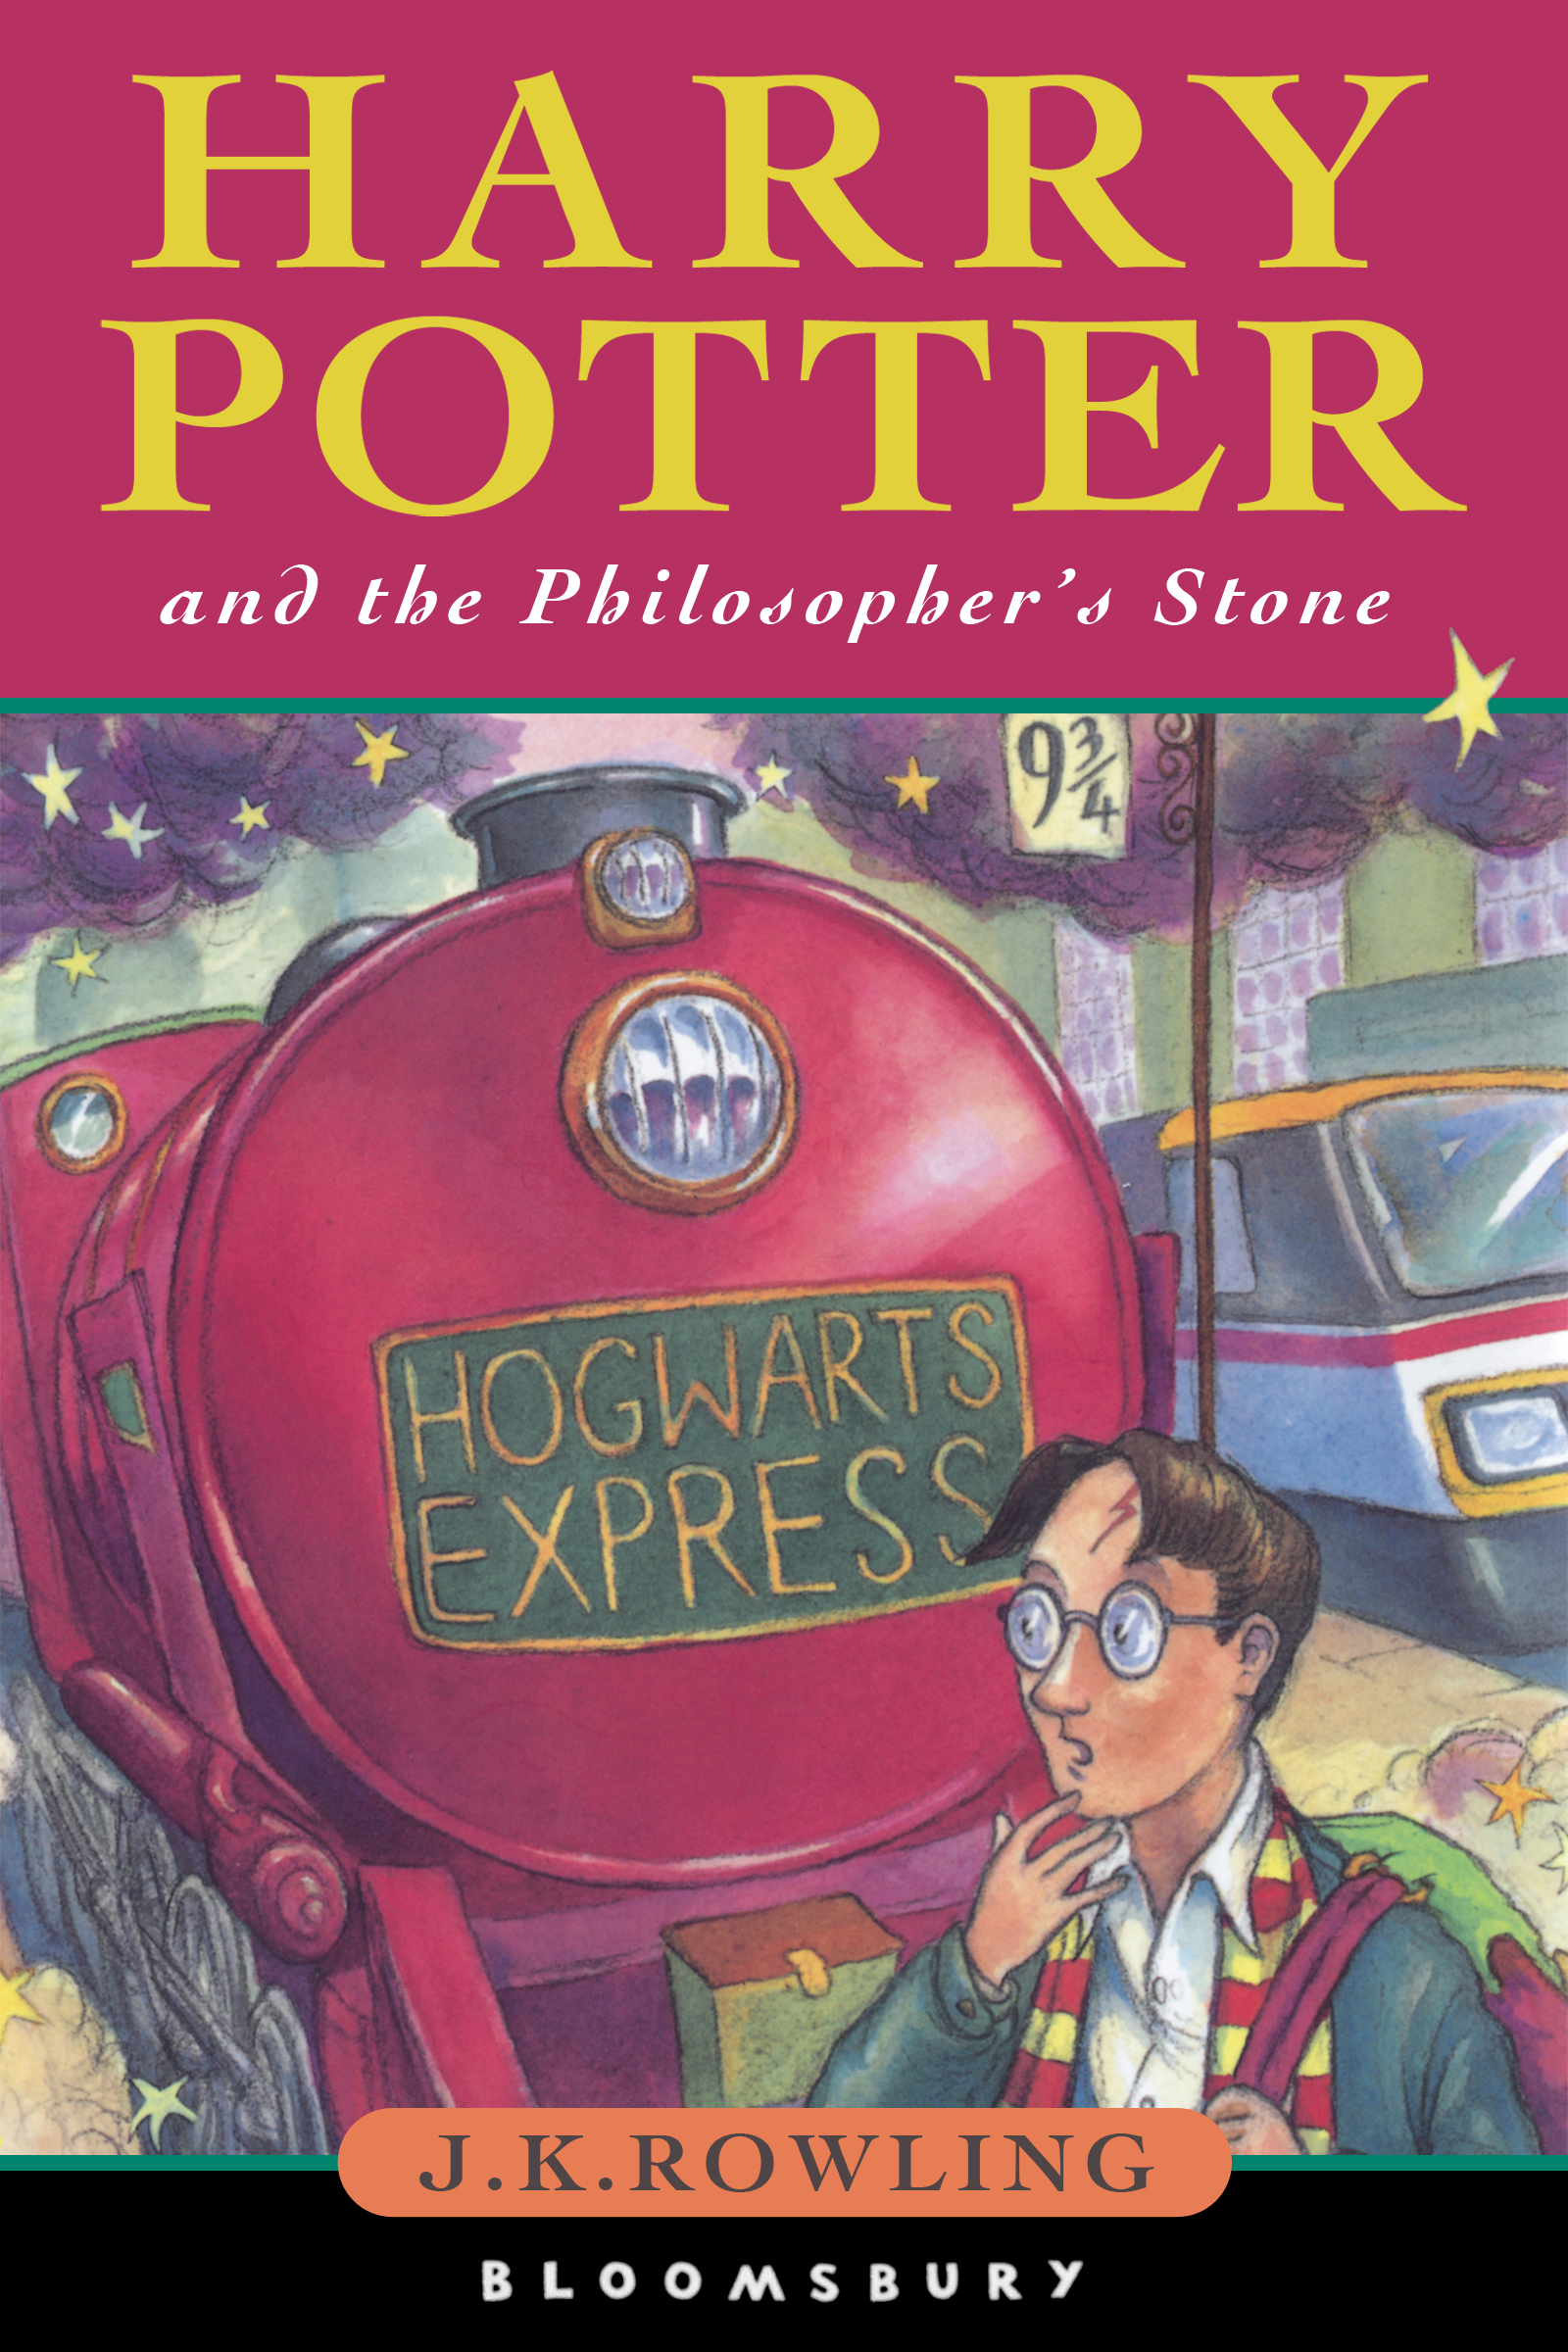 Rowling Spanish Edition 2000 Harry Potter and the Philosopher's Stone 